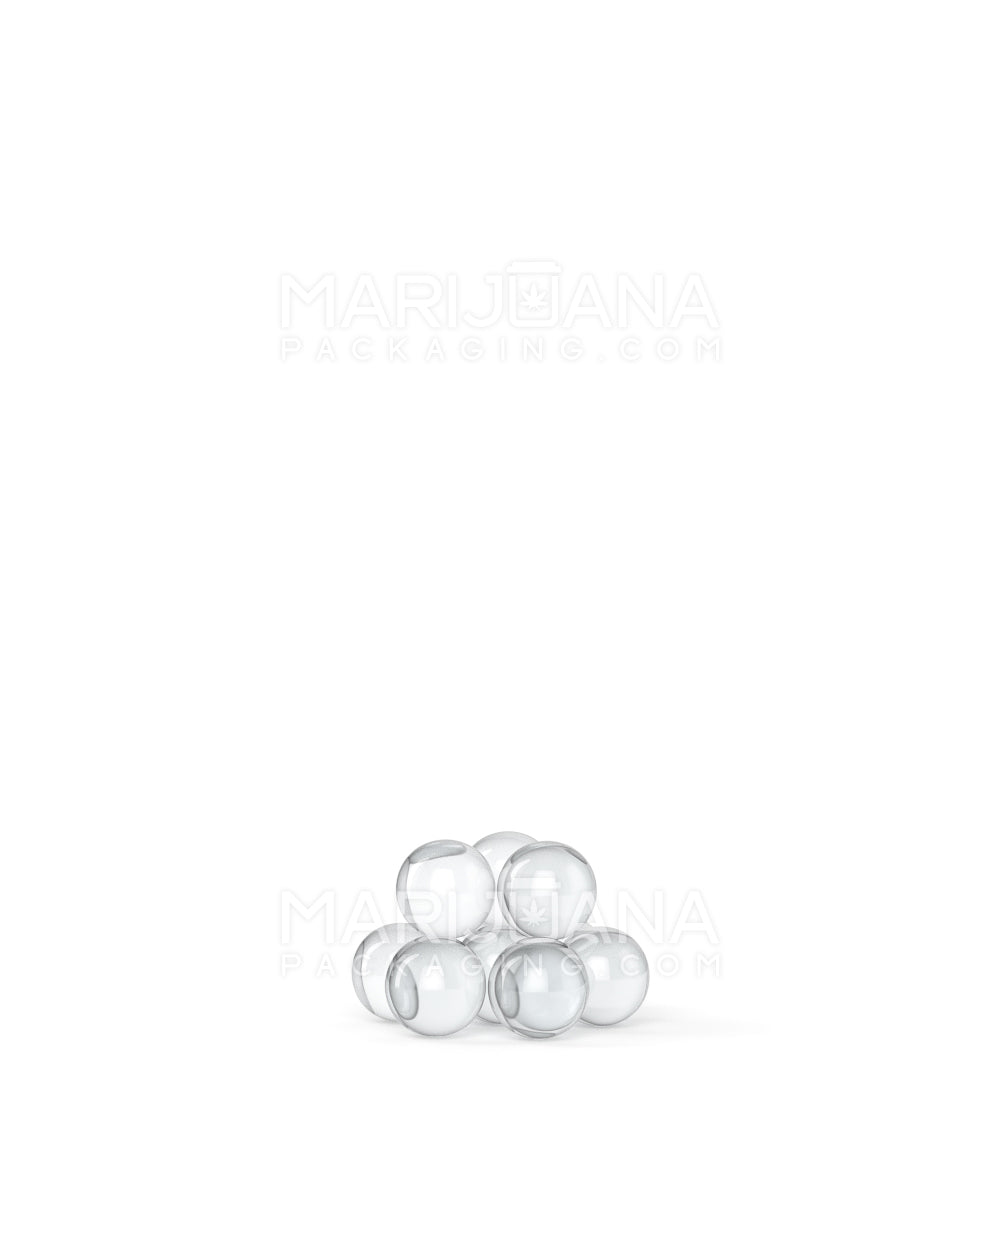 Thick 4mm Quartz Dab Pearls for Banger Nails - 10 Count - 3